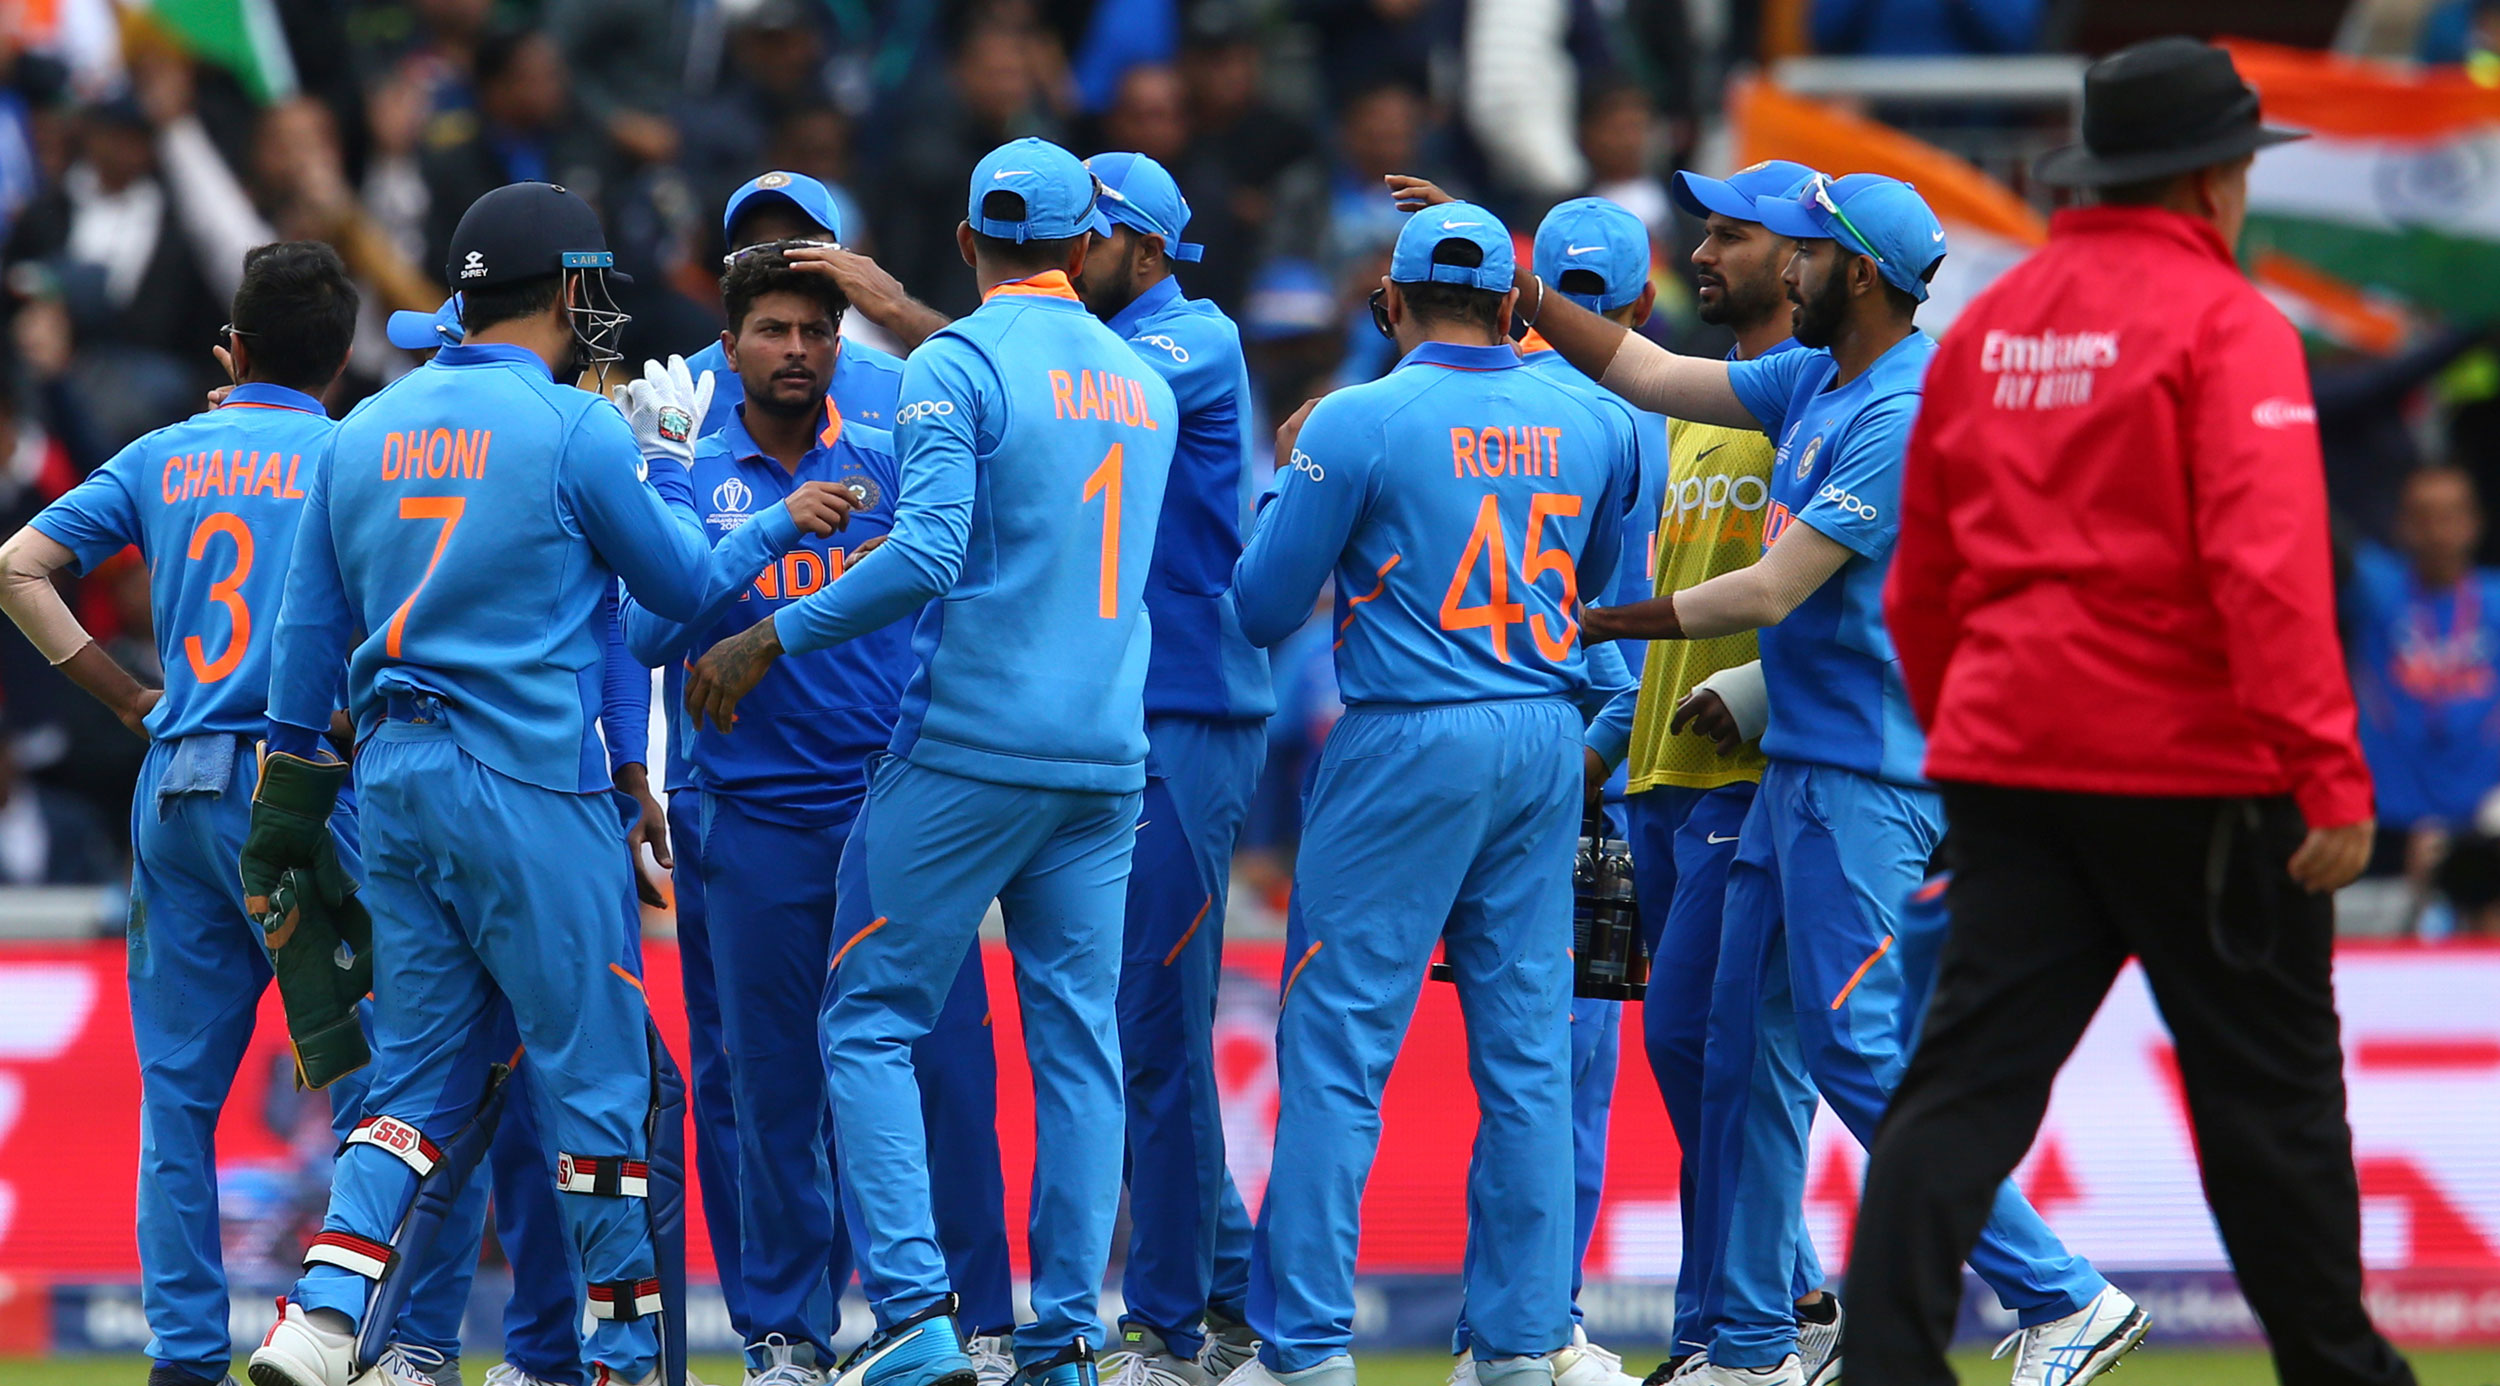 Kuldeep Yadav (third from left) celebrates with his teammates after taking the wicket of Pakistan's Babar Azam during the ICC Cricket World Cup match between India and Pakistan at Old Trafford in Manchester, England, on June 16, 2019. 